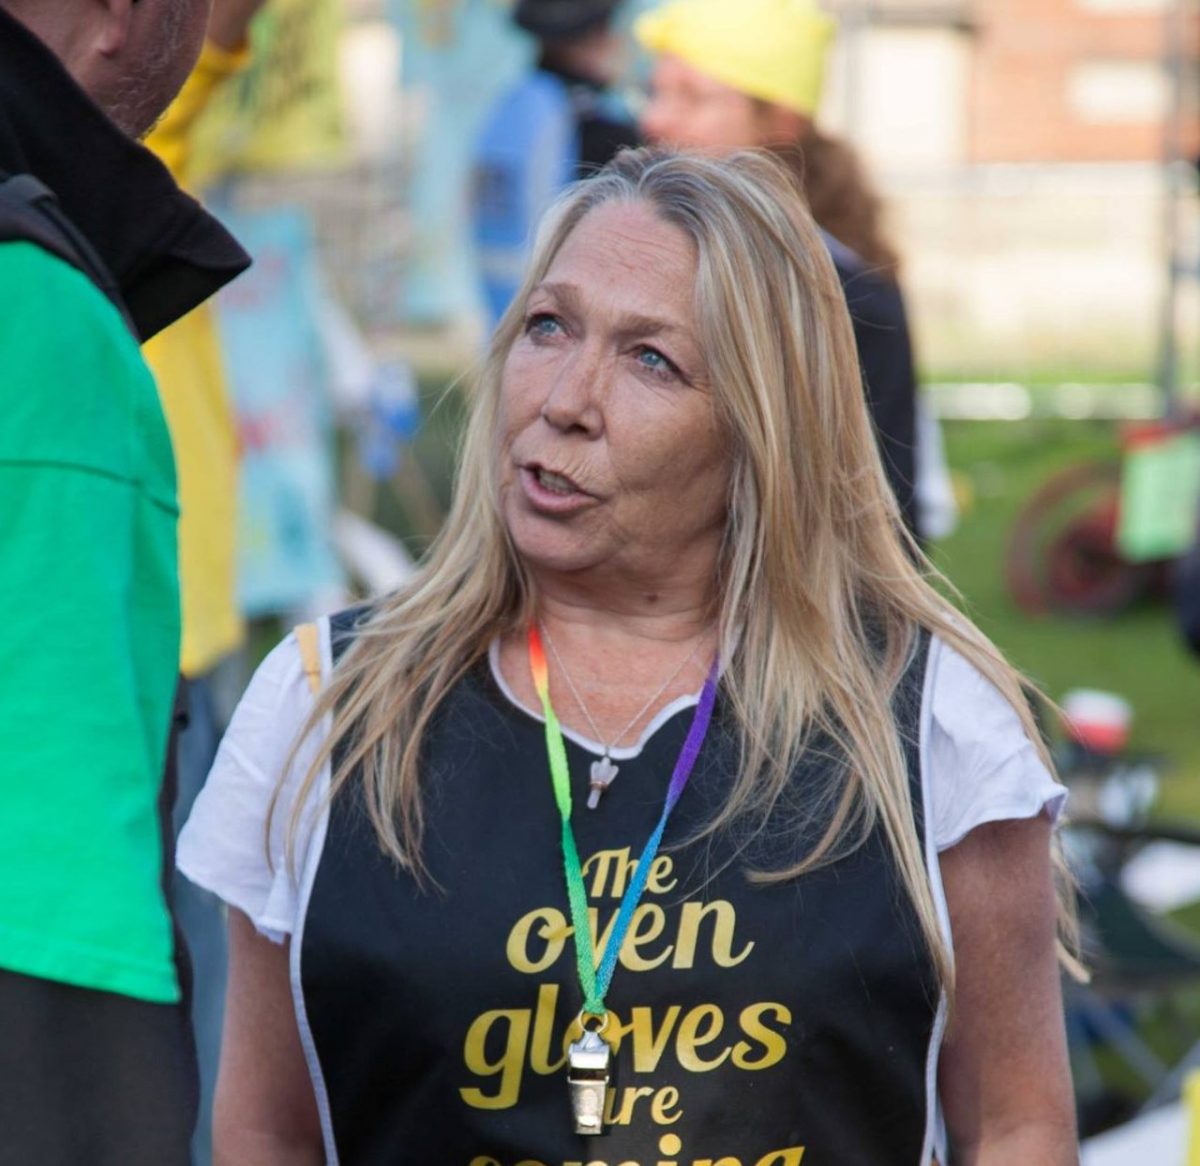 In support of anti-fracking campaigner Tina Rothery